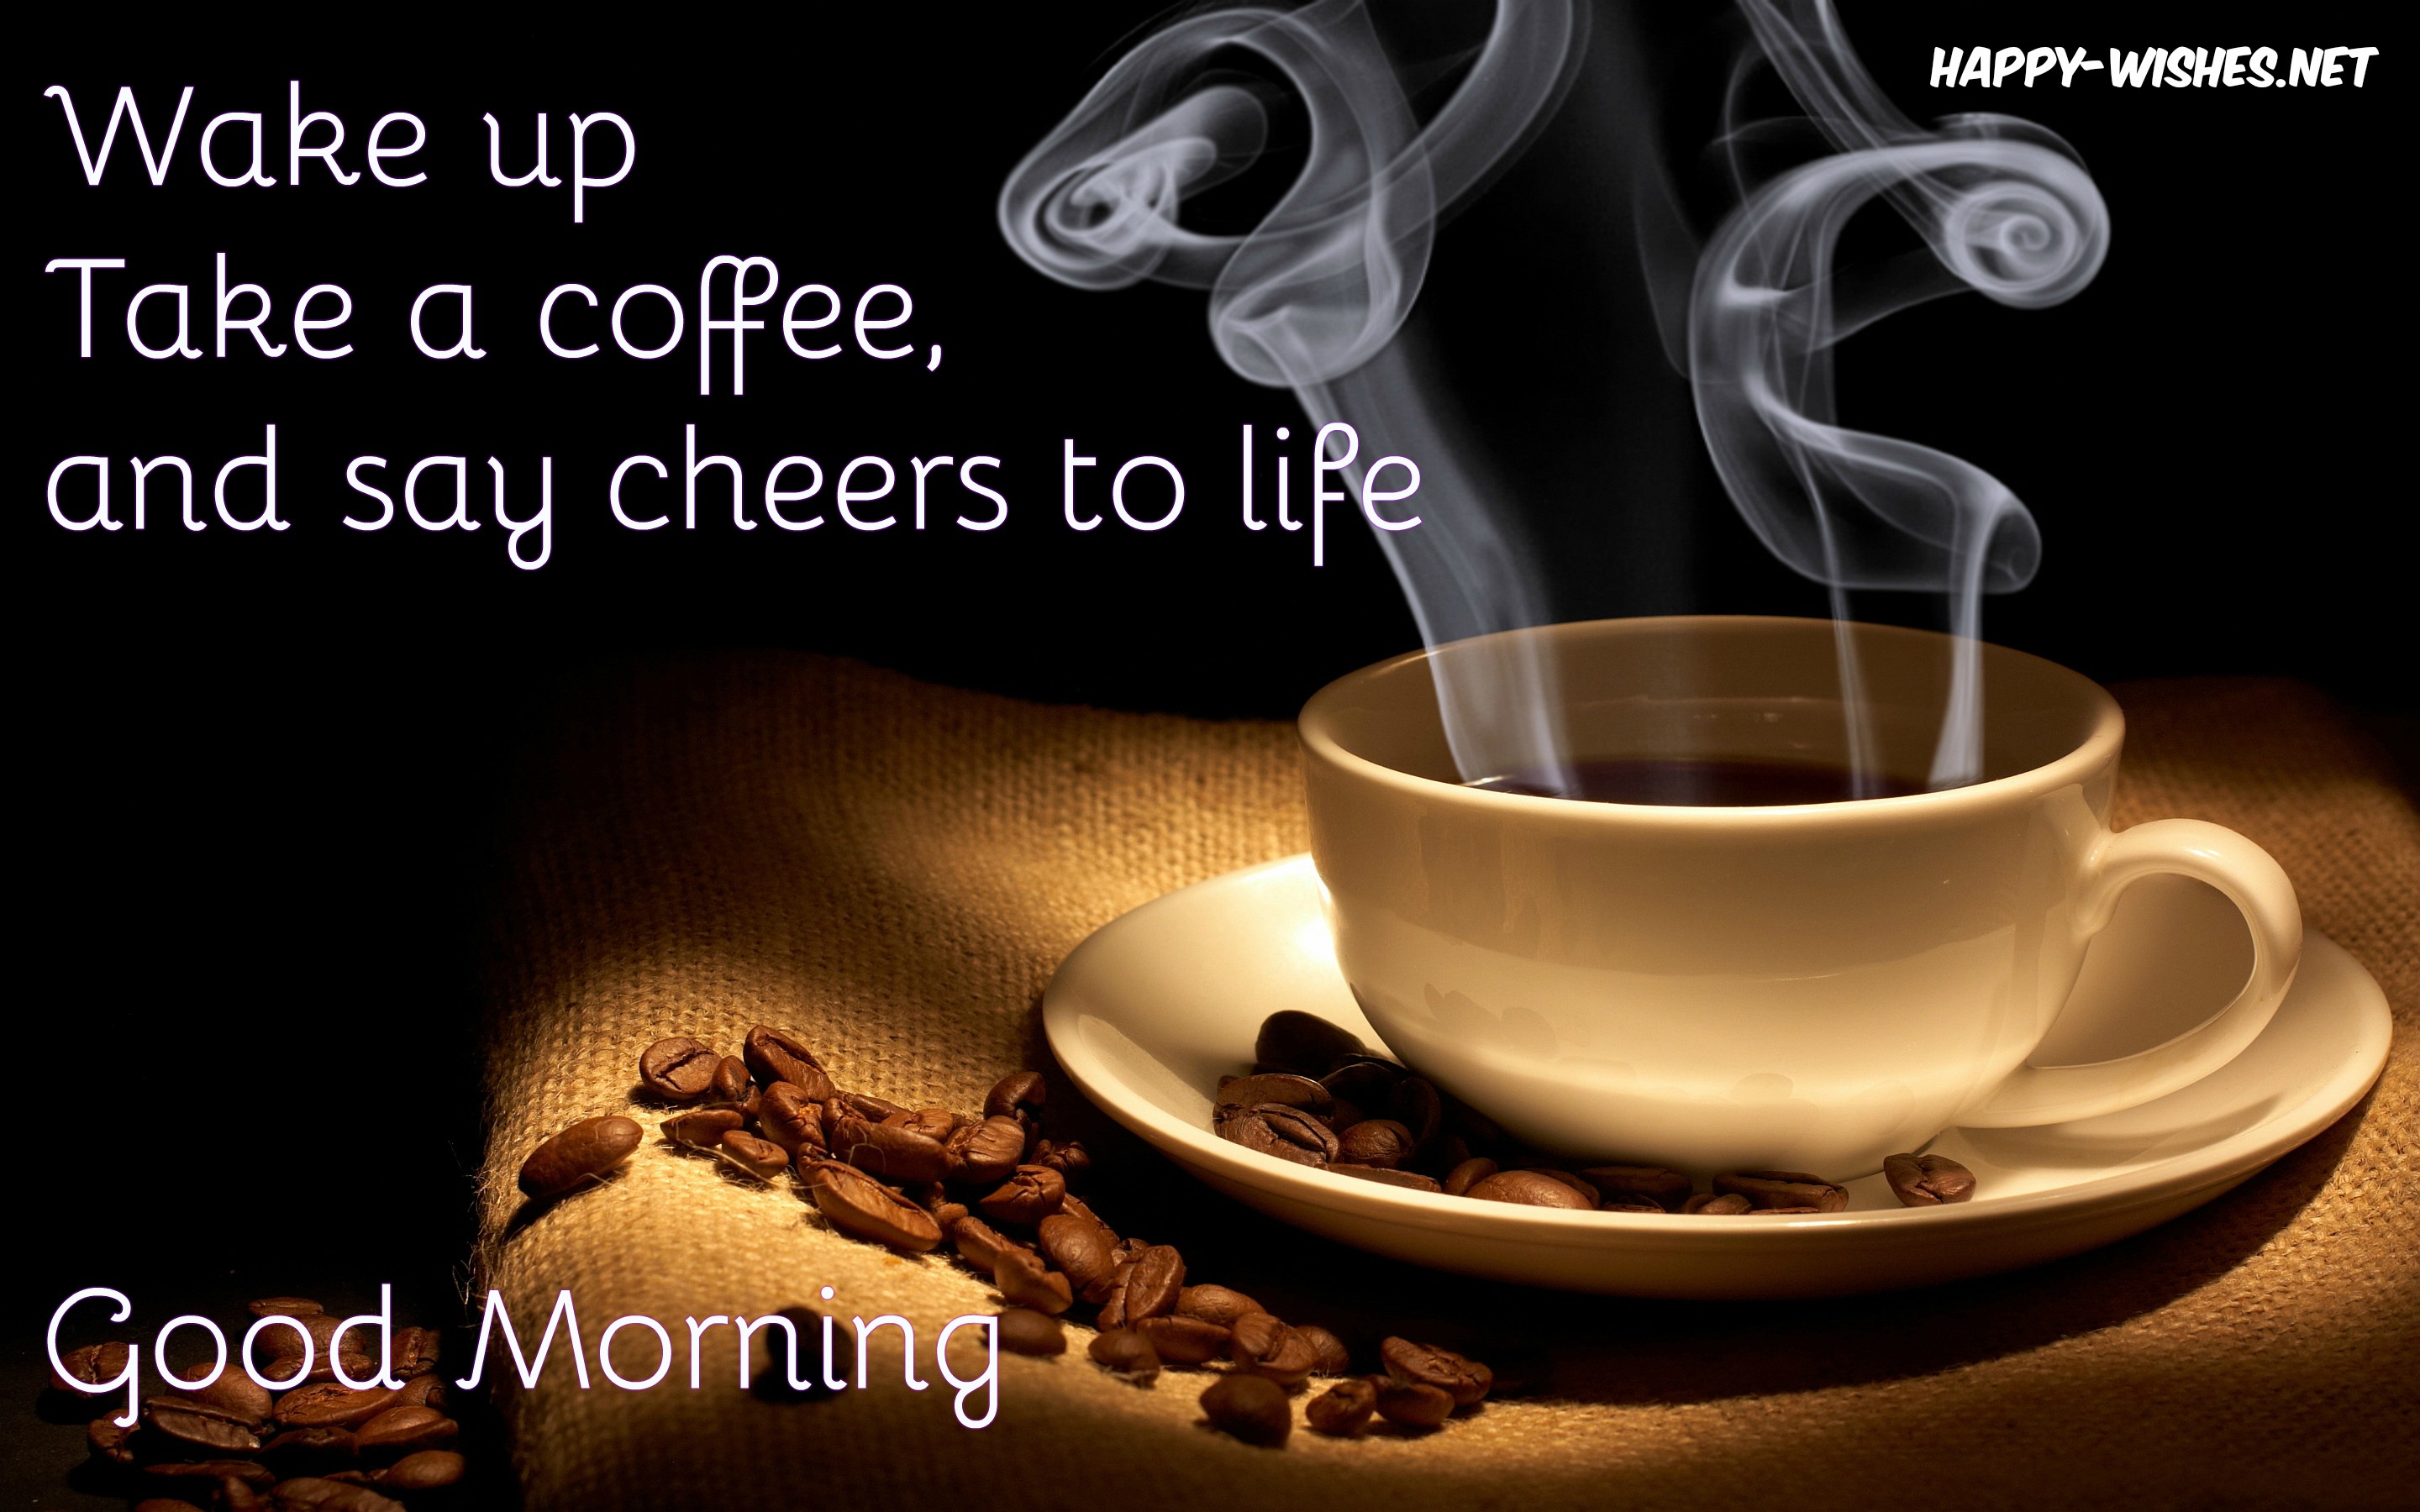 Good morning Coffee Quotes Wishes - Coffee Mug Images